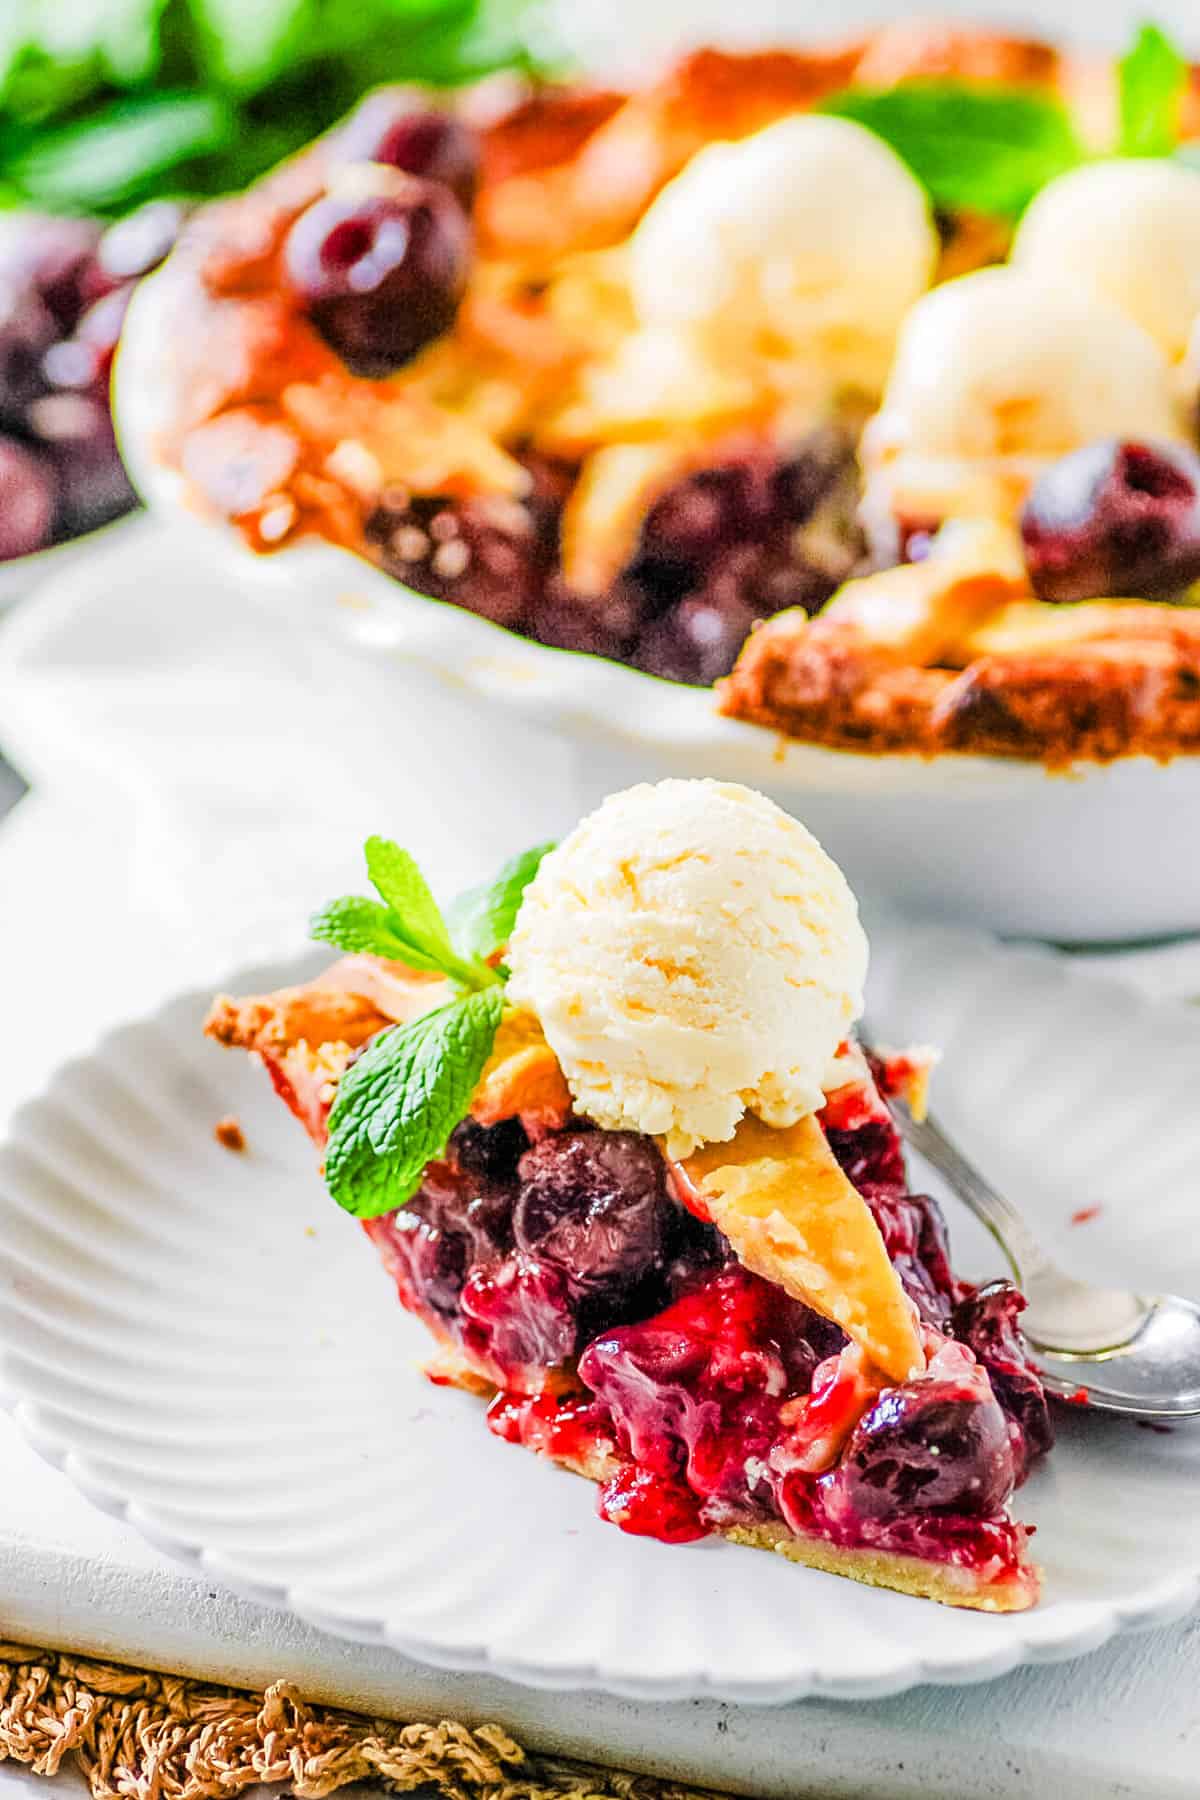 Slice of cherry pie with frozen cherries on a white plate, topped with ice cream and garnished with mint.